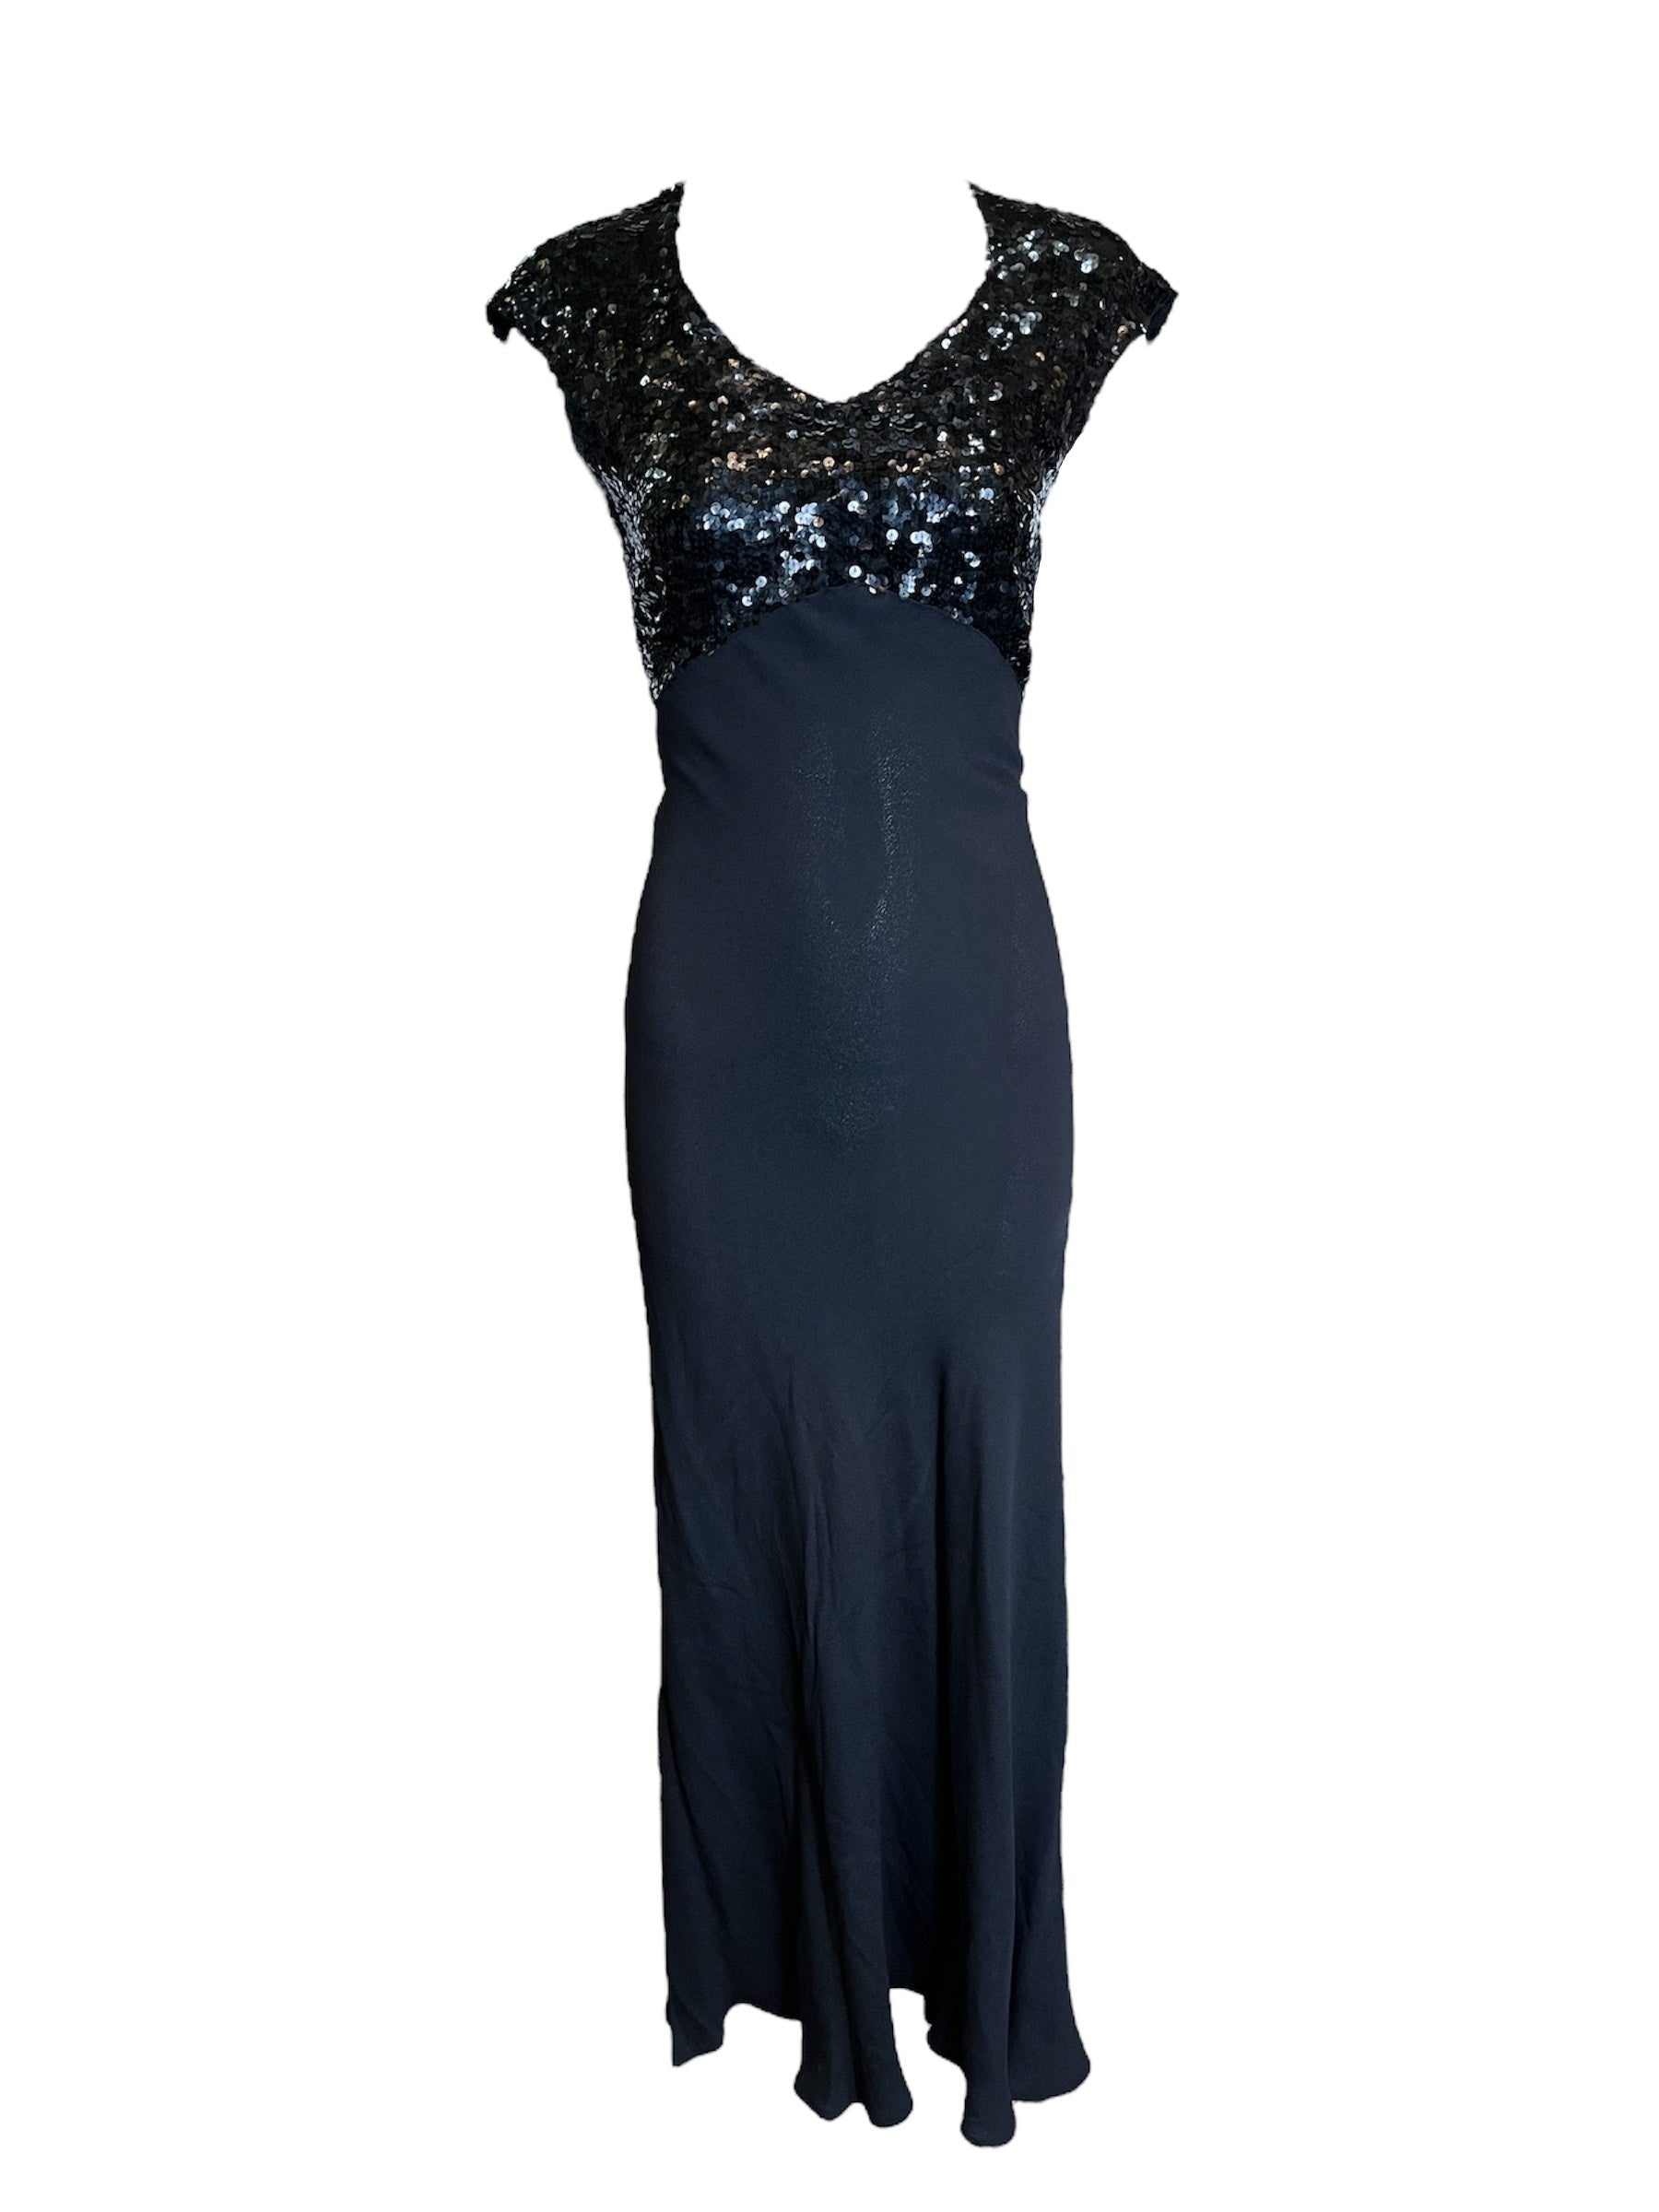 1930s Bias Crepe Gown with Sequin Bodice FRONT PHOTO 1 OF 4